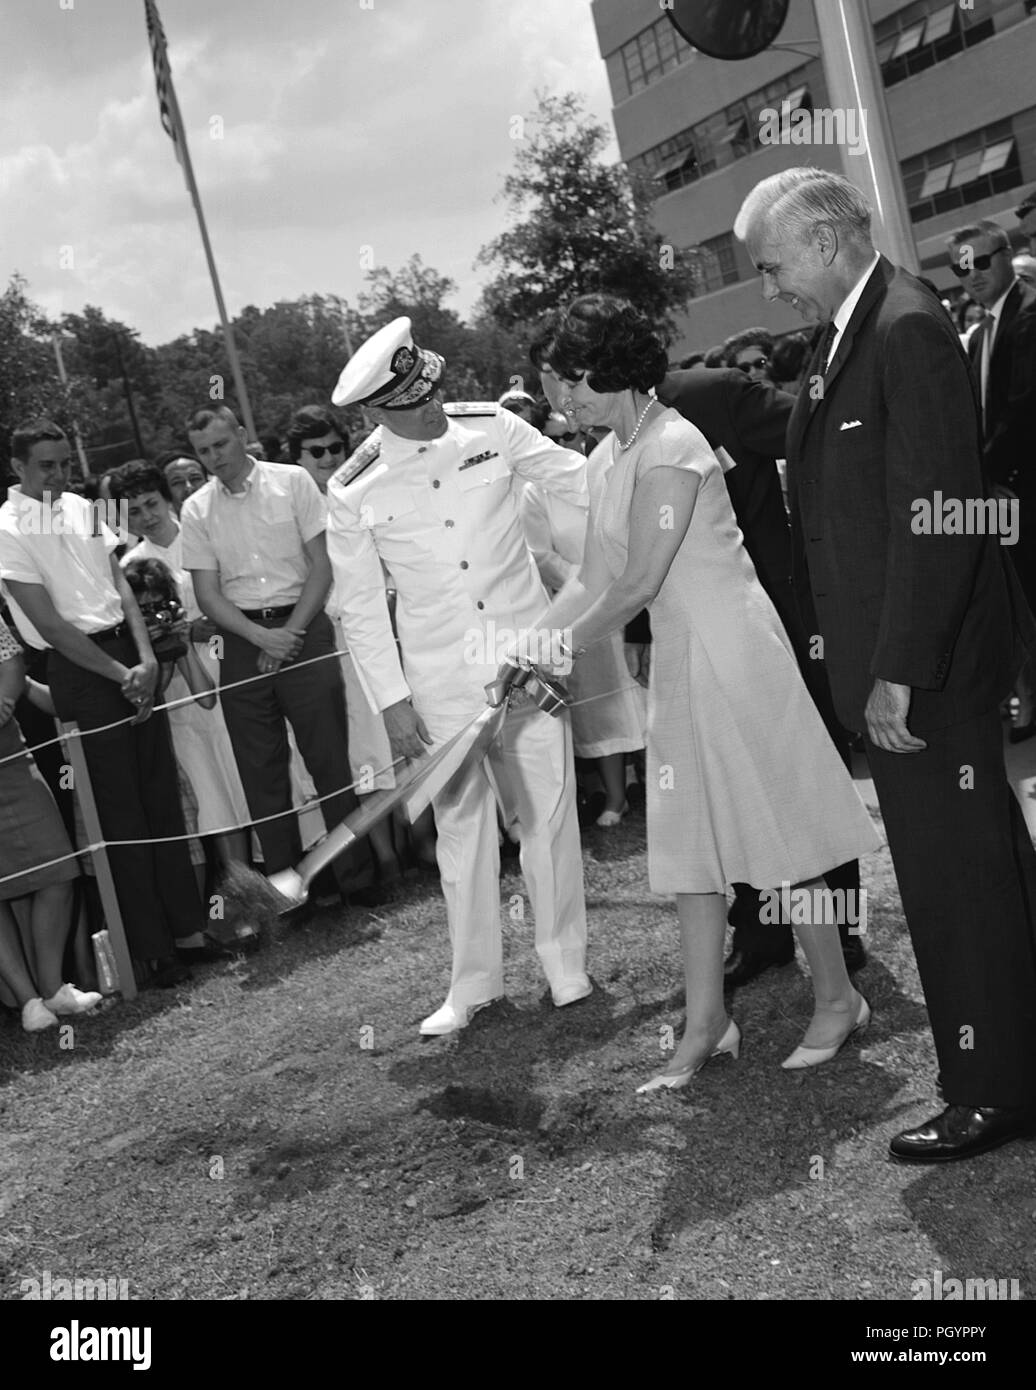 Centers for Disease Control (CDC) Officials digging the first shovel at Roybal Campus, Clifton Road, Atlanta, Georgia, 1964. Image courtesy Centers for Disease Control / David Sencer, M.D. M.P.H. () Stock Photo